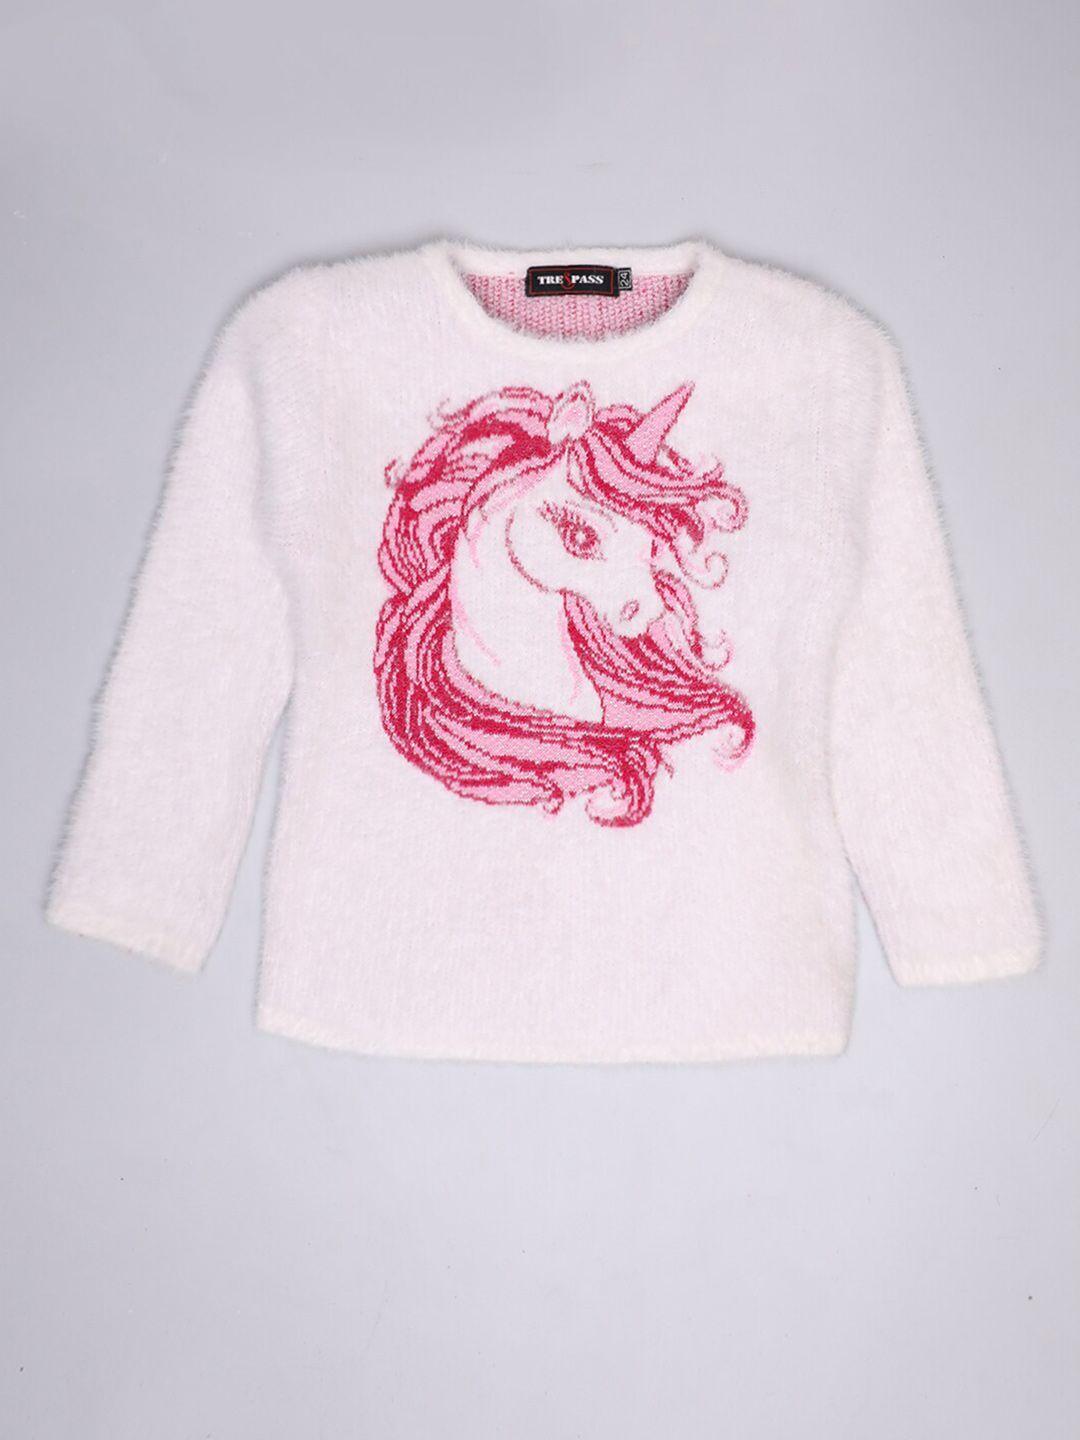 tre&pass-boys-white-&-pink-printed-woolen-pullover